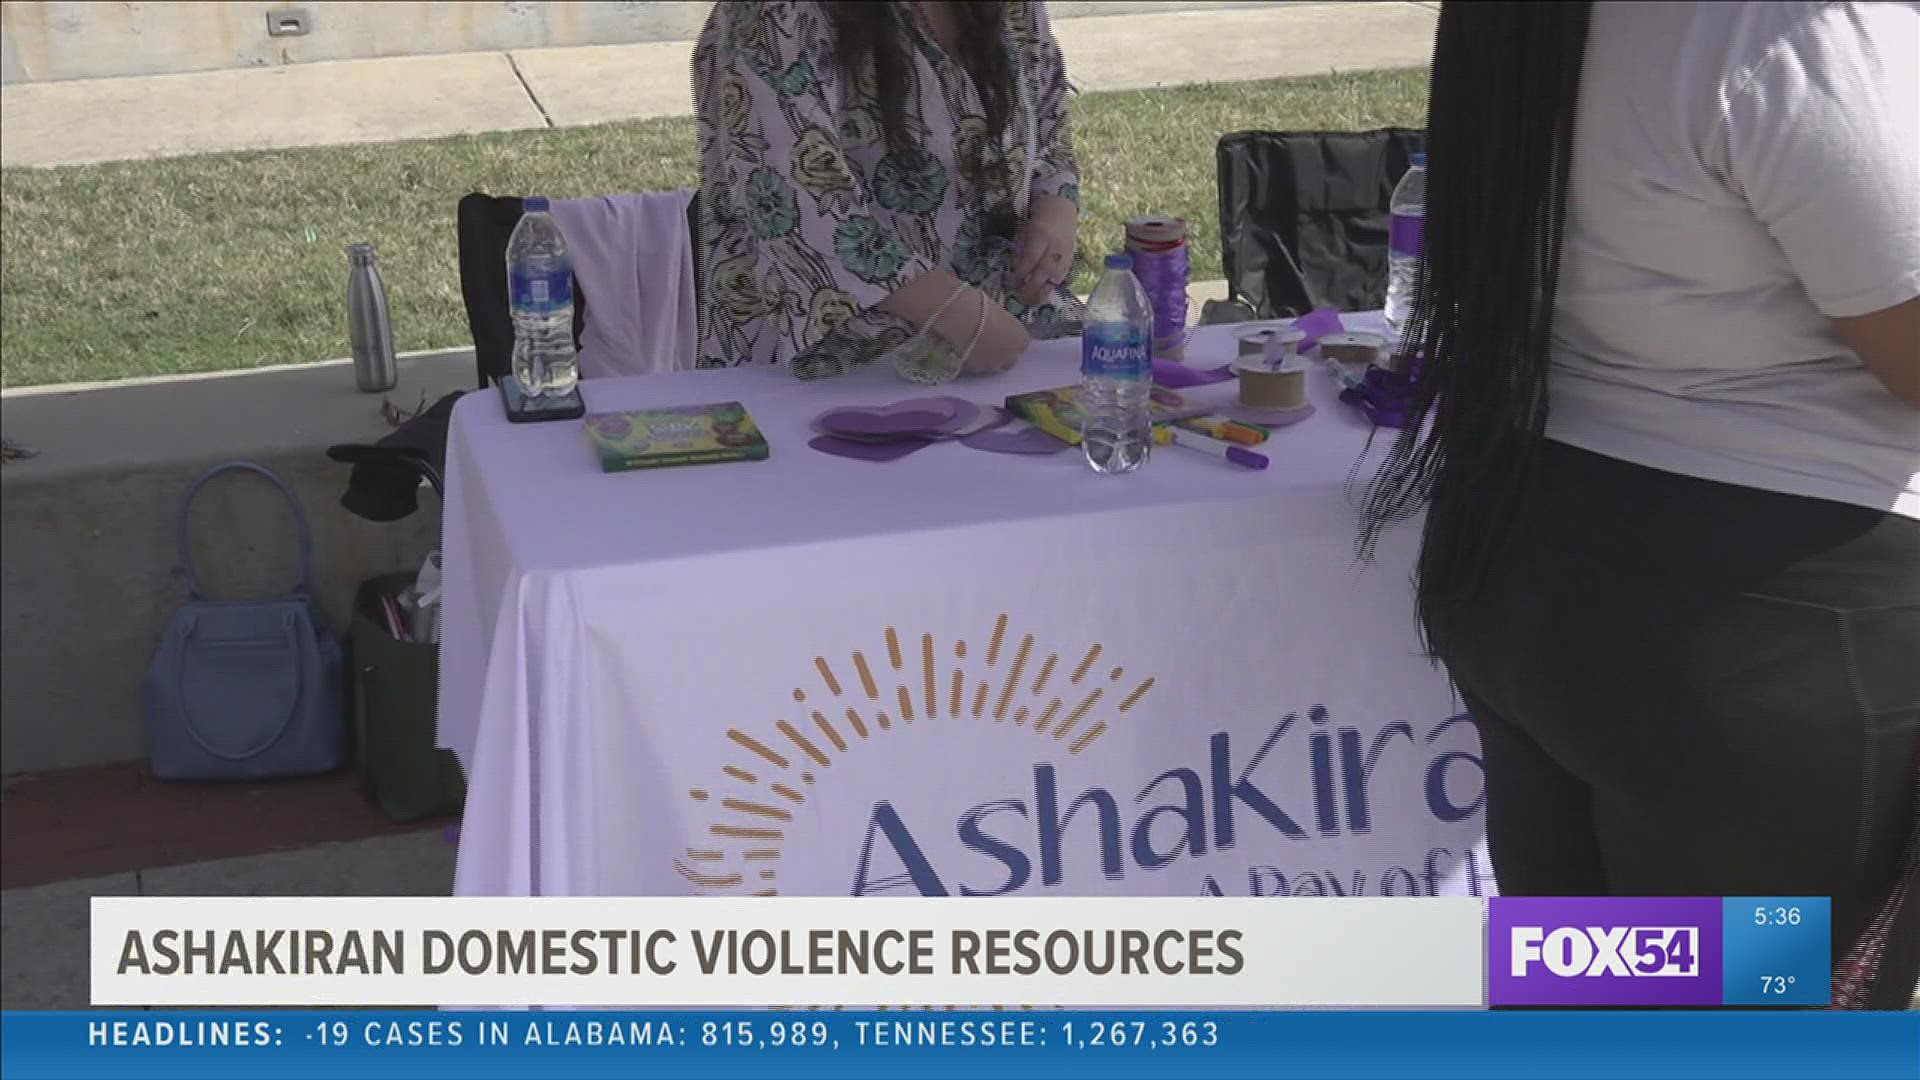 AshaKiran provides support for victims of domestic violence and sexual assault.